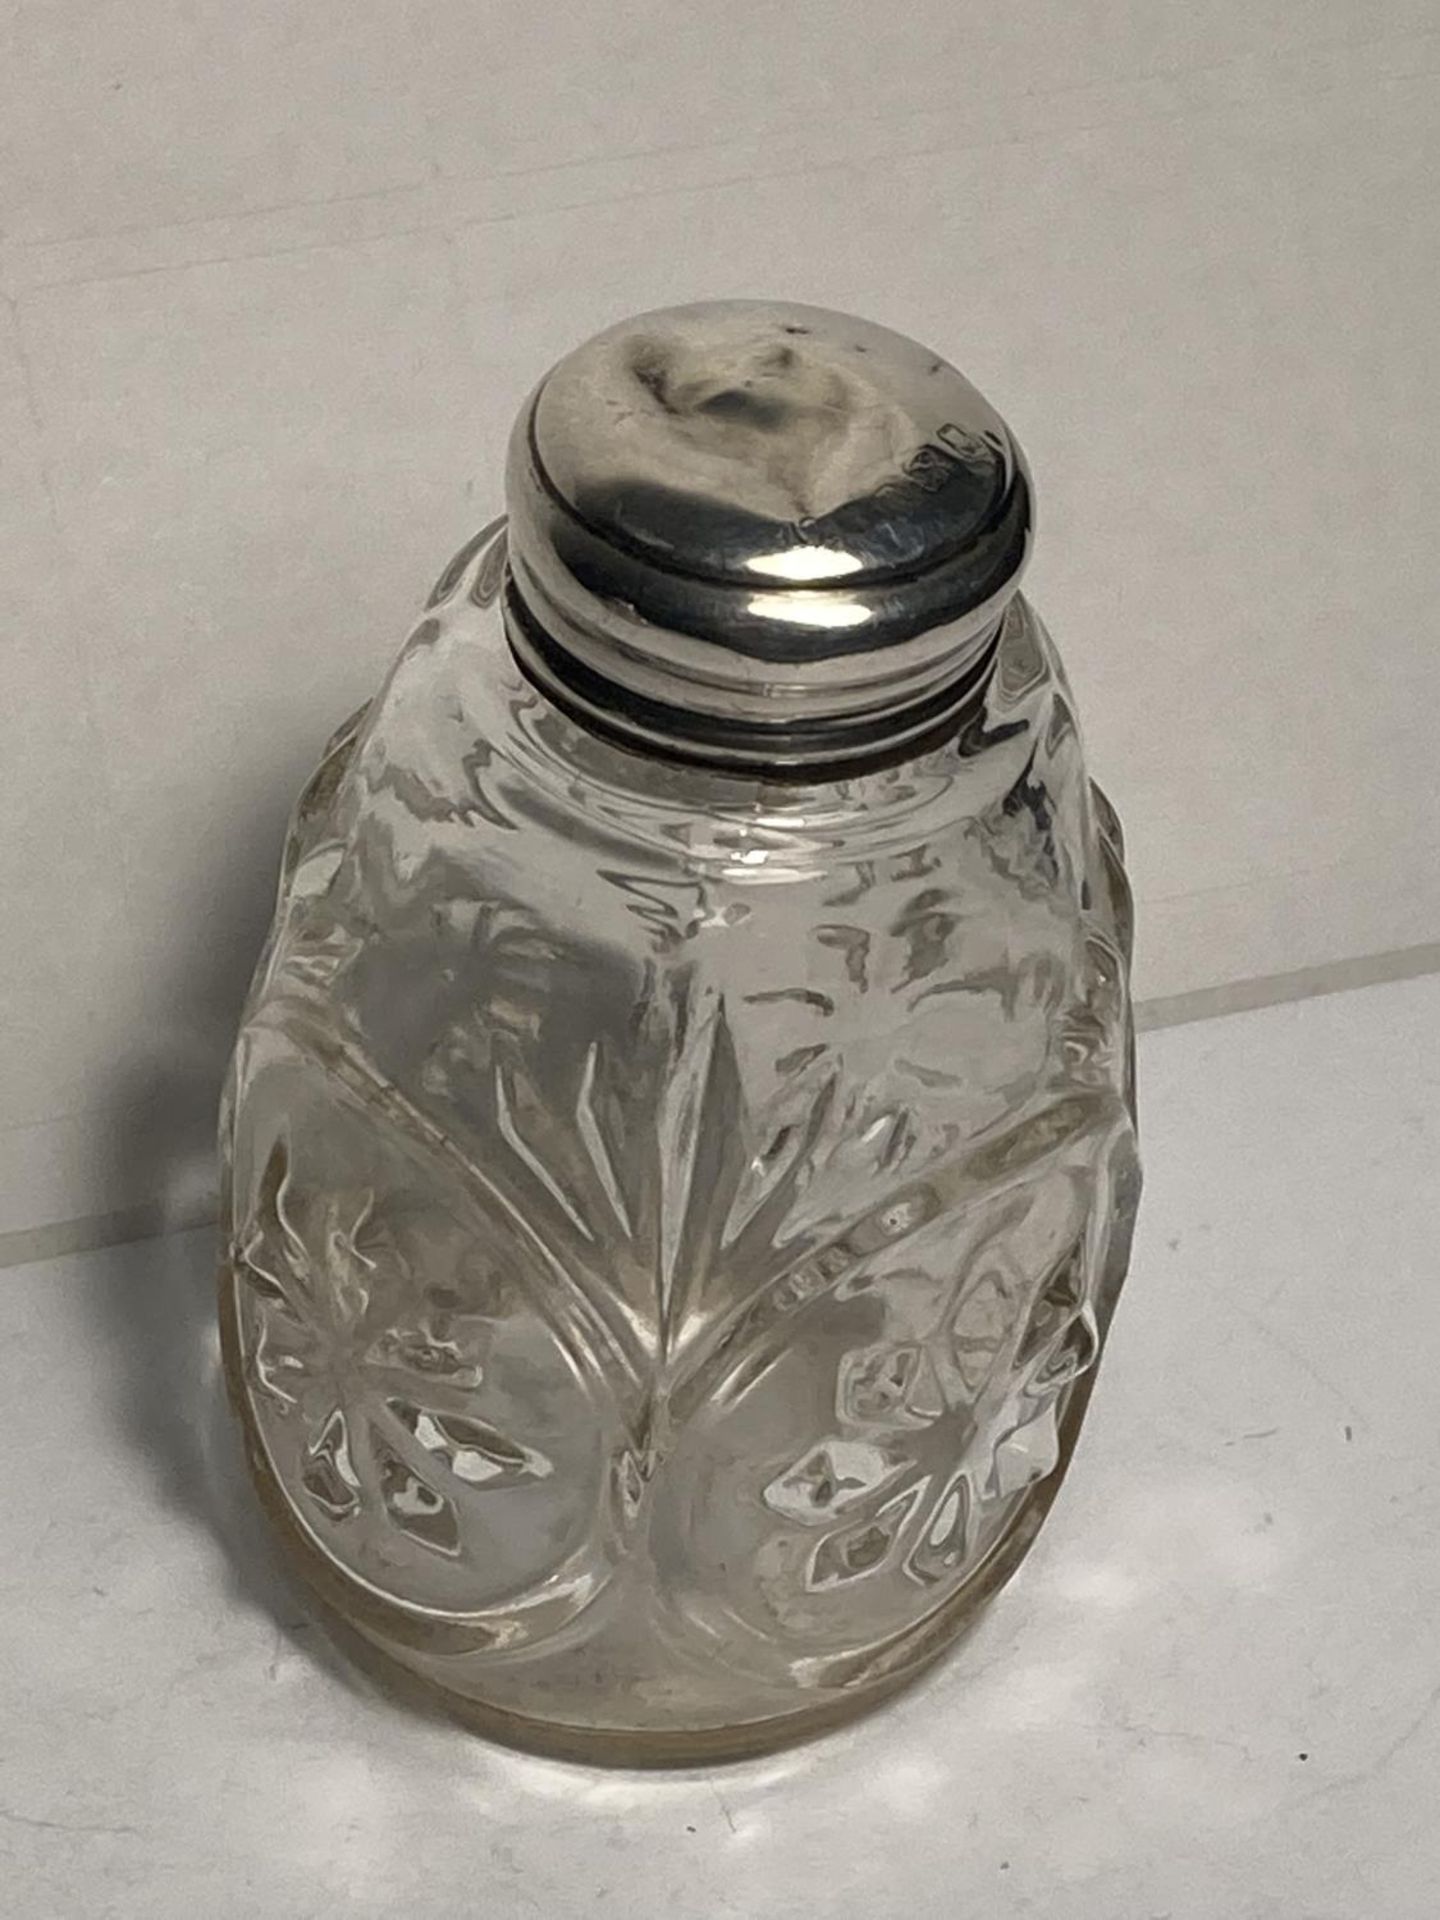 TWO CUT GLASS BOTTLES WITH HALLMARKED SILVER TOPS ONE BIRMINGHAM AND ONE INDISTINCT - Image 4 of 5